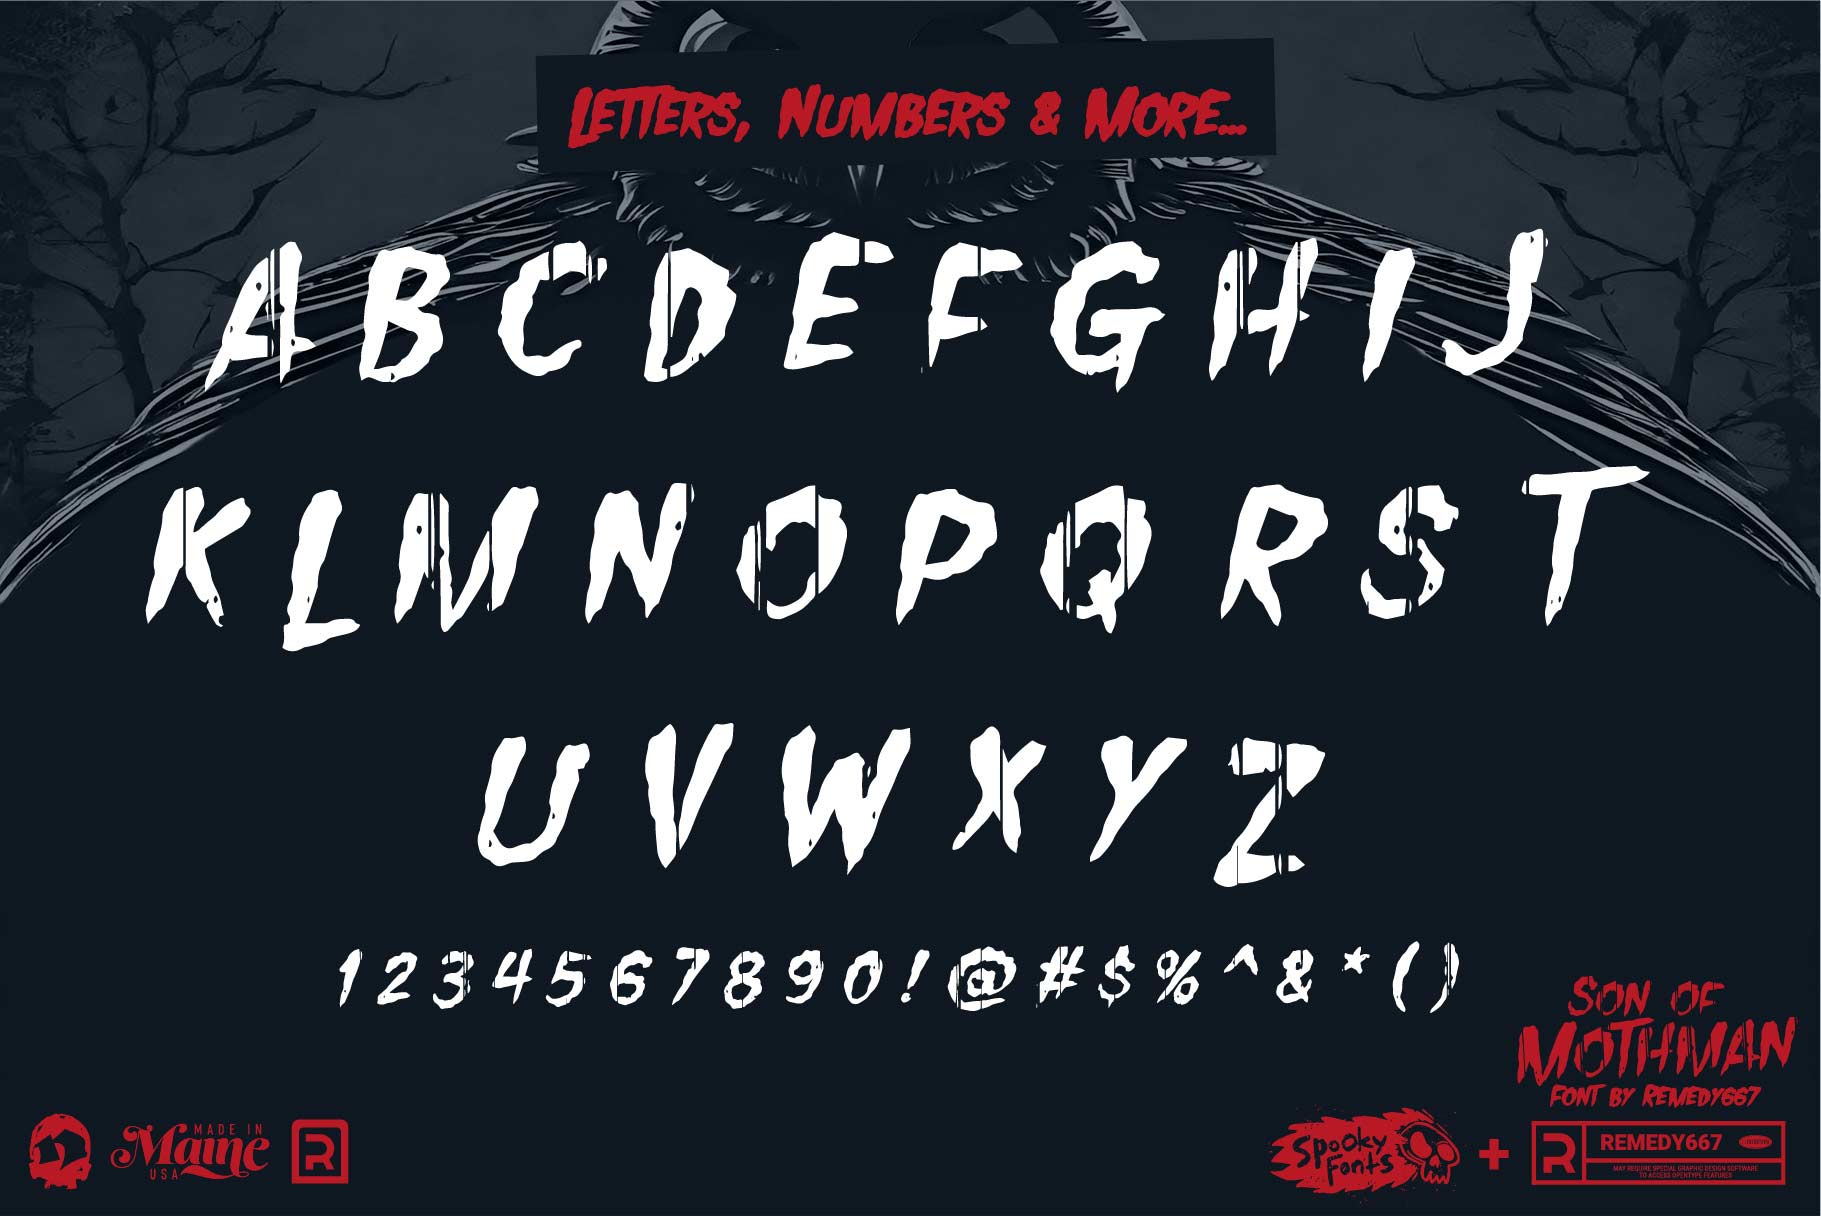 Textured horror movie graphic display font | RetroSupply Co.